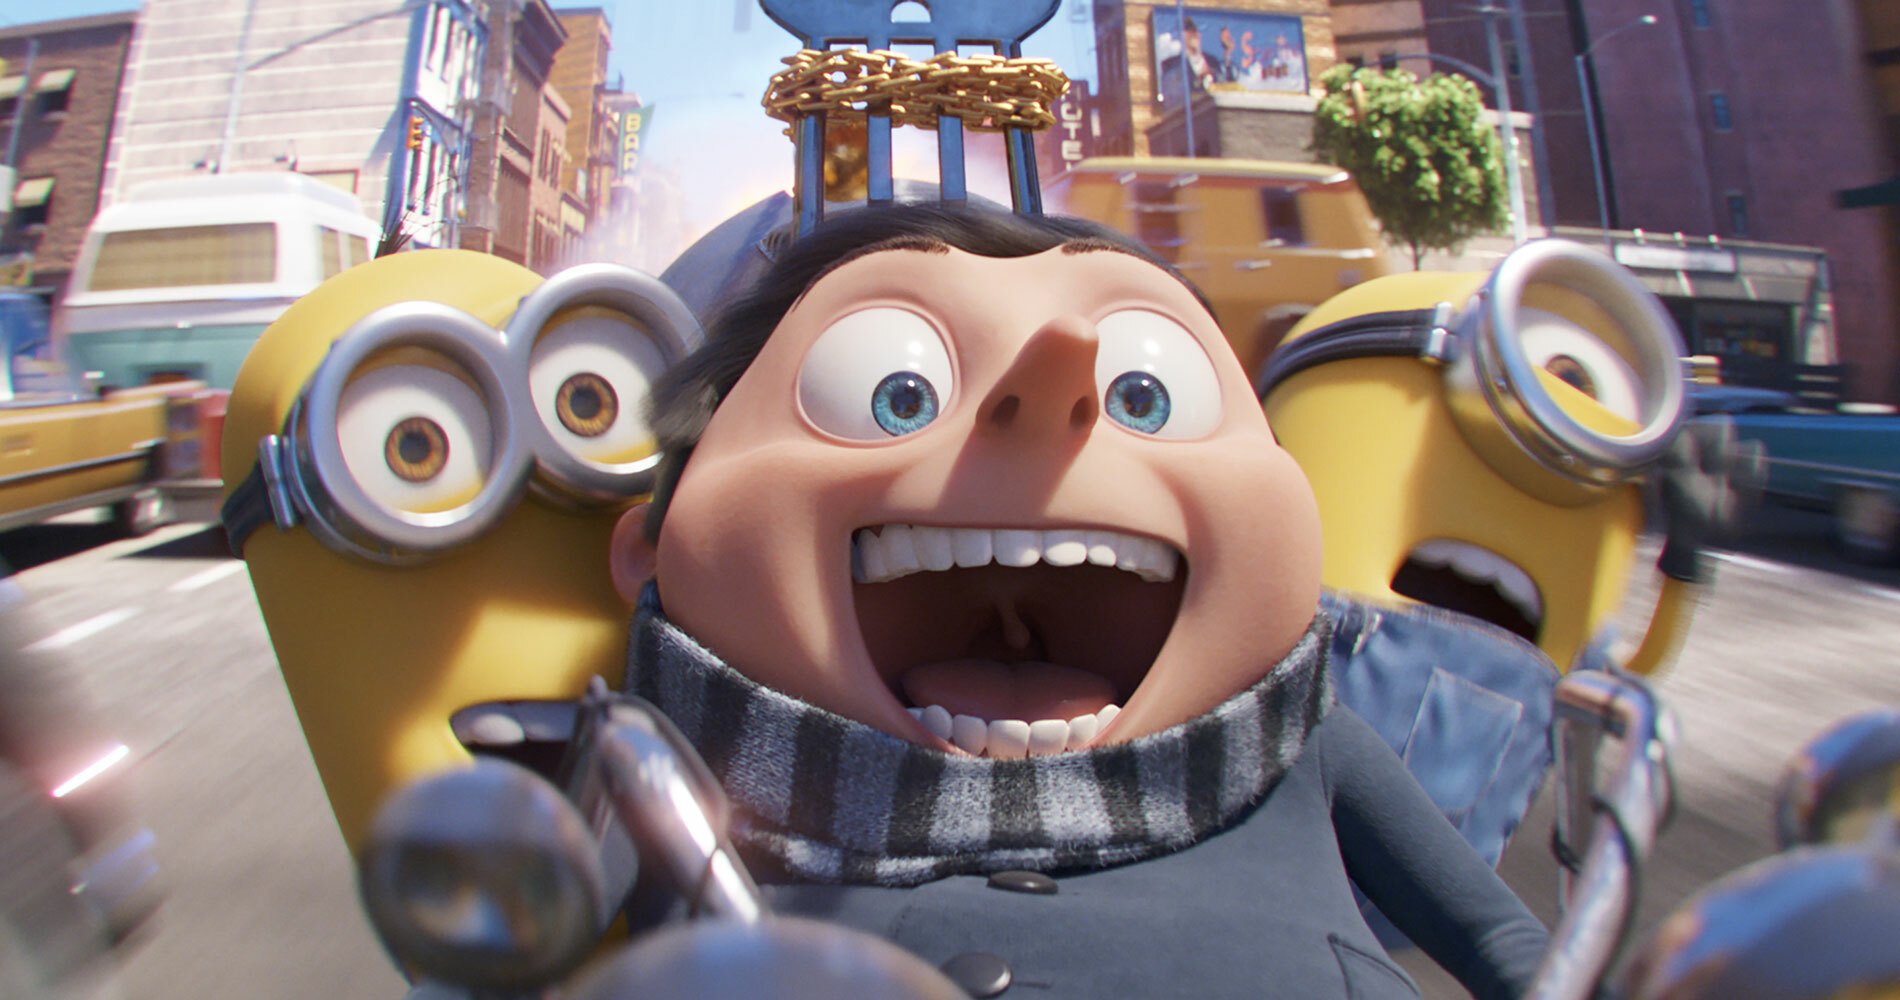 Gru alonside two of the titular minions riding down a city street at high speeds